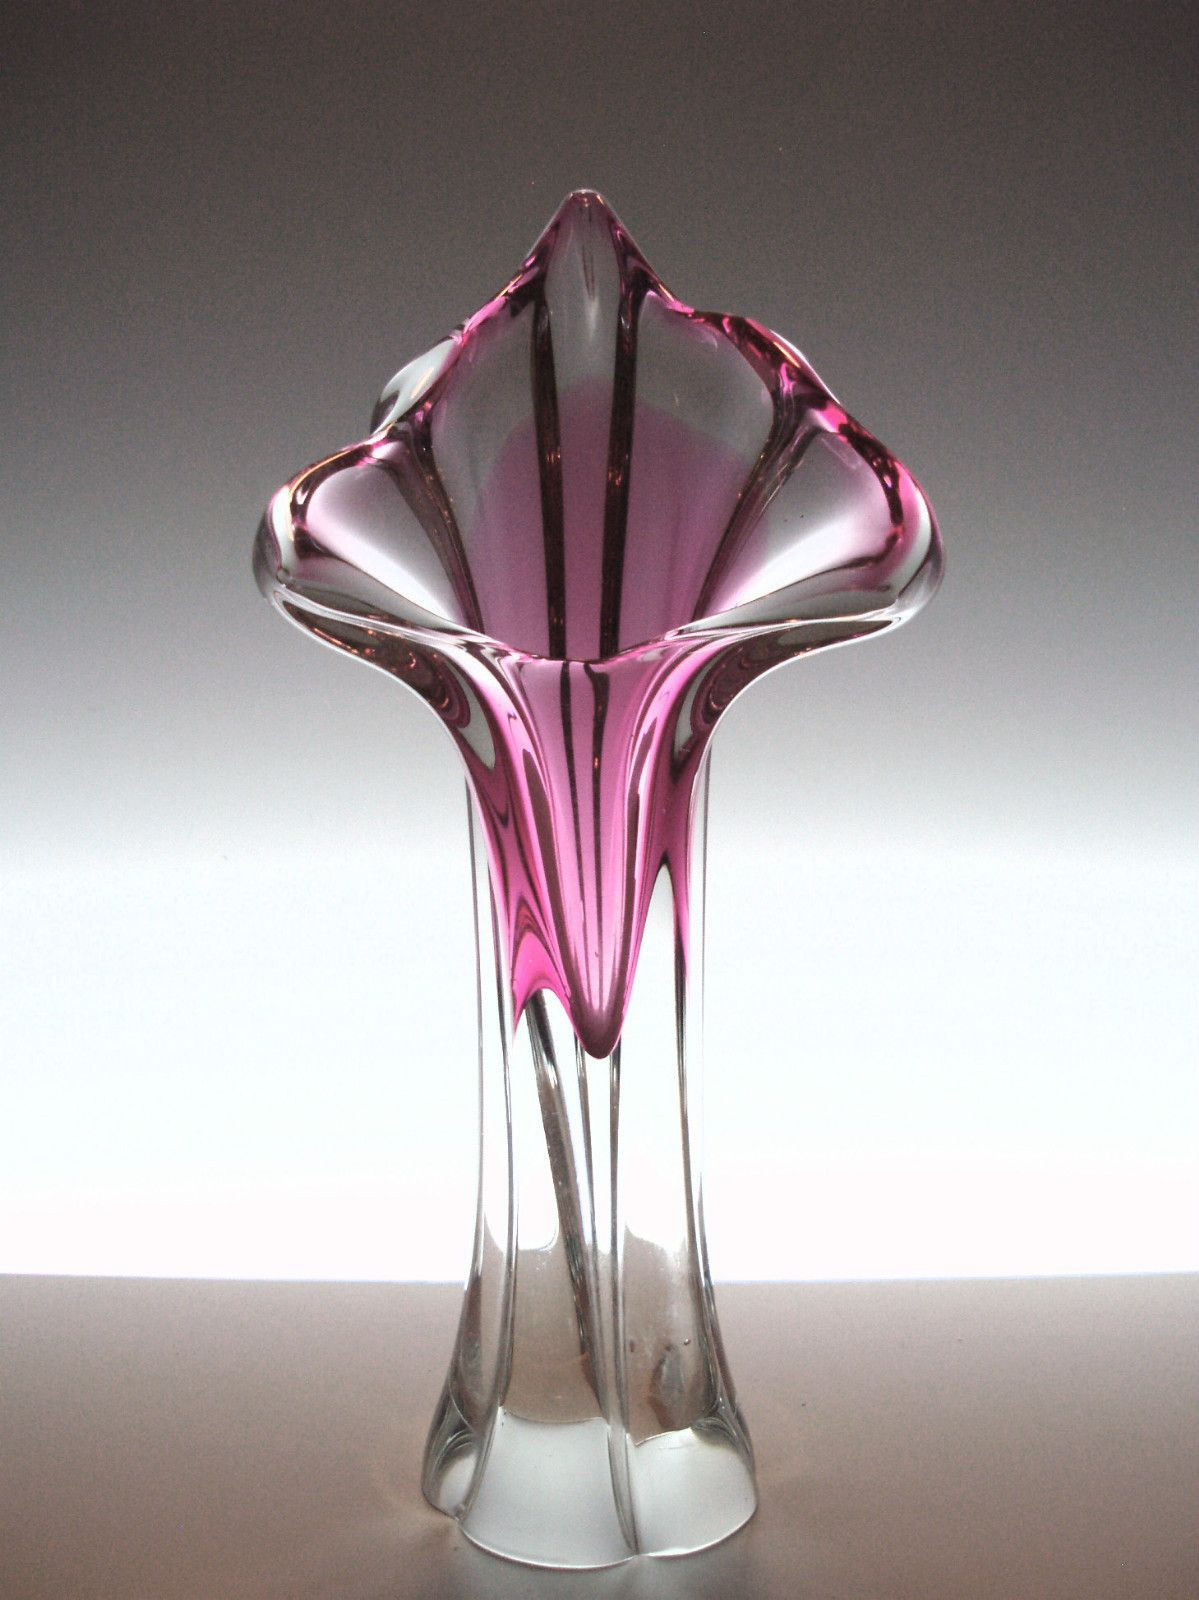 18 Wonderful Czech Crystal Vase 2024 free download czech crystal vase of wonderful czech chribska glassworks cased pink cranberry flower in czech cranberry glass vase